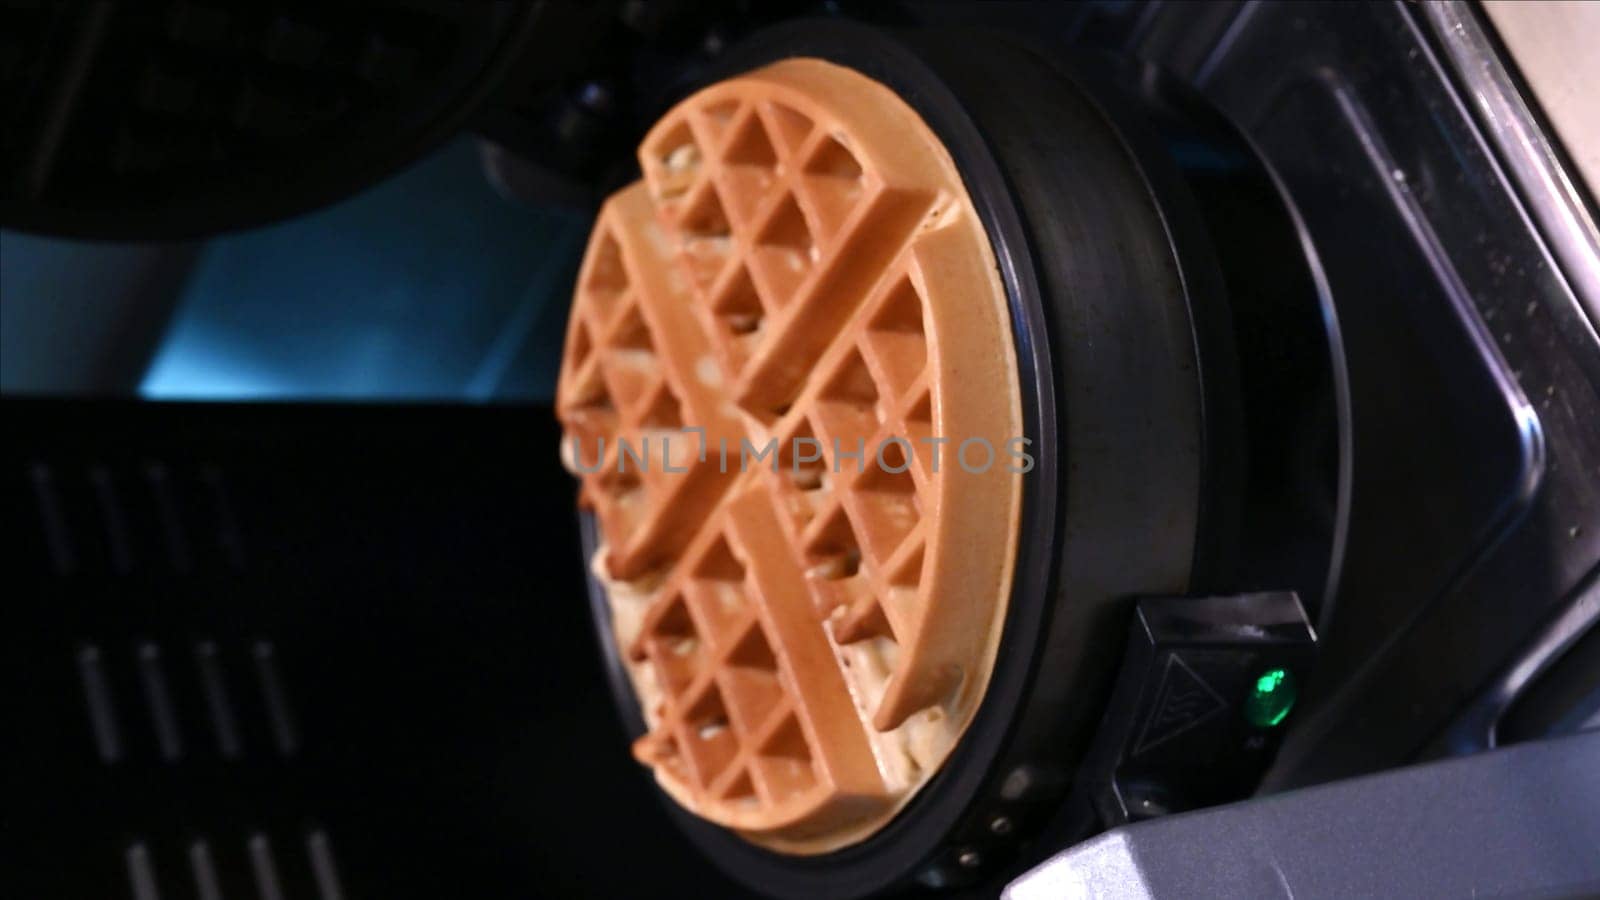 Belgian Viennese Wavy Waffles. The cooking process in an electric waffle iron. Cooking. vertical videos by Peruphotoart